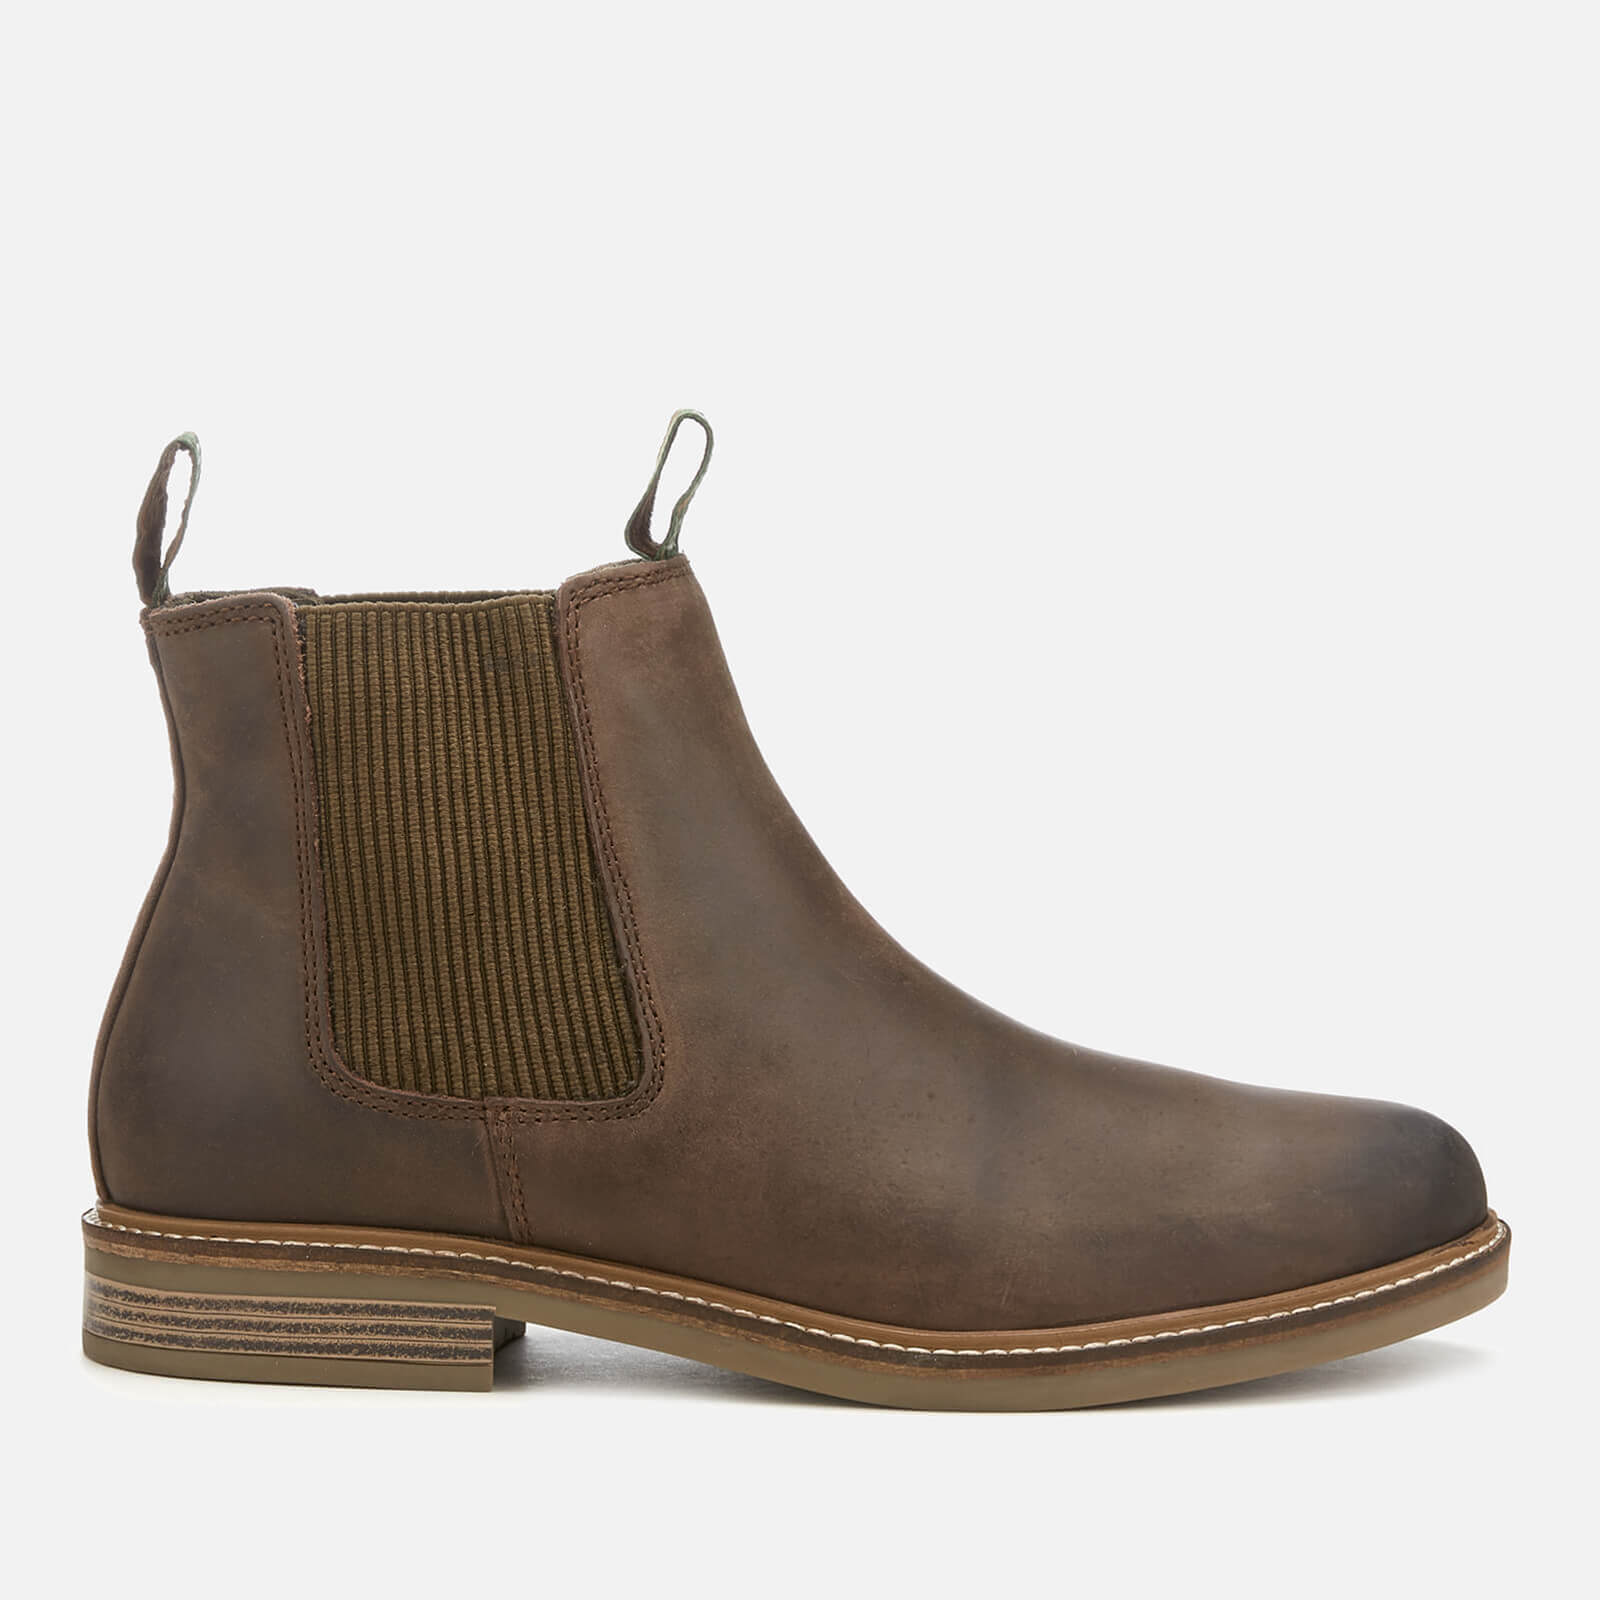 Barbour Men’s Farsley Leather Chelsea Boots - Choco